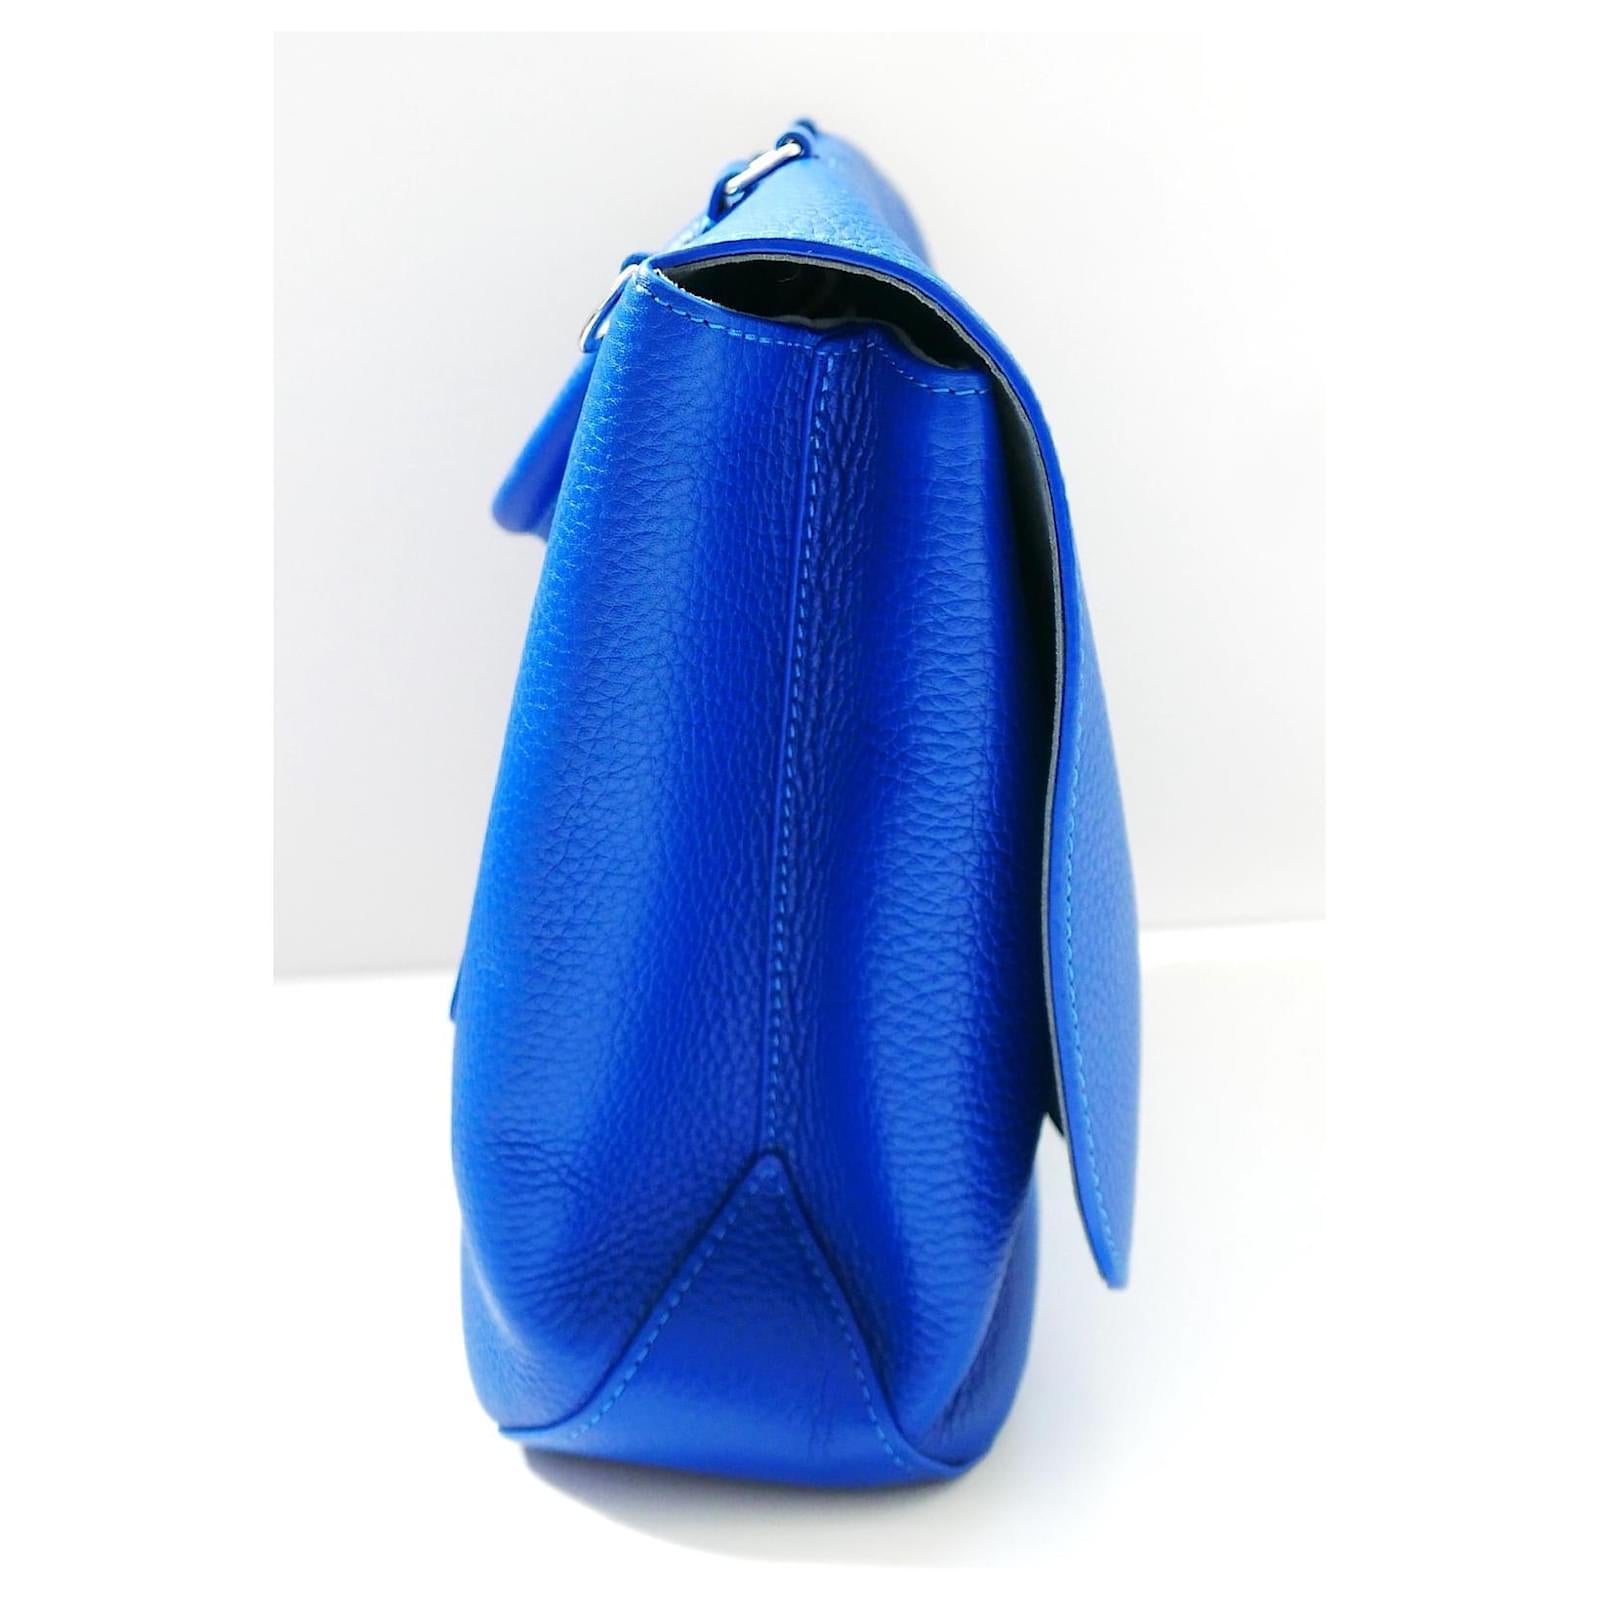 Gorgeous Louis Vuitton Volta Top Handle Bag - unused with dustbag, sticker tag and care leaflet. Made from thick, bright blue grained Taurillon leather with palladium hardware. It has a super chic semi structure shape with leather coated LV clasp,